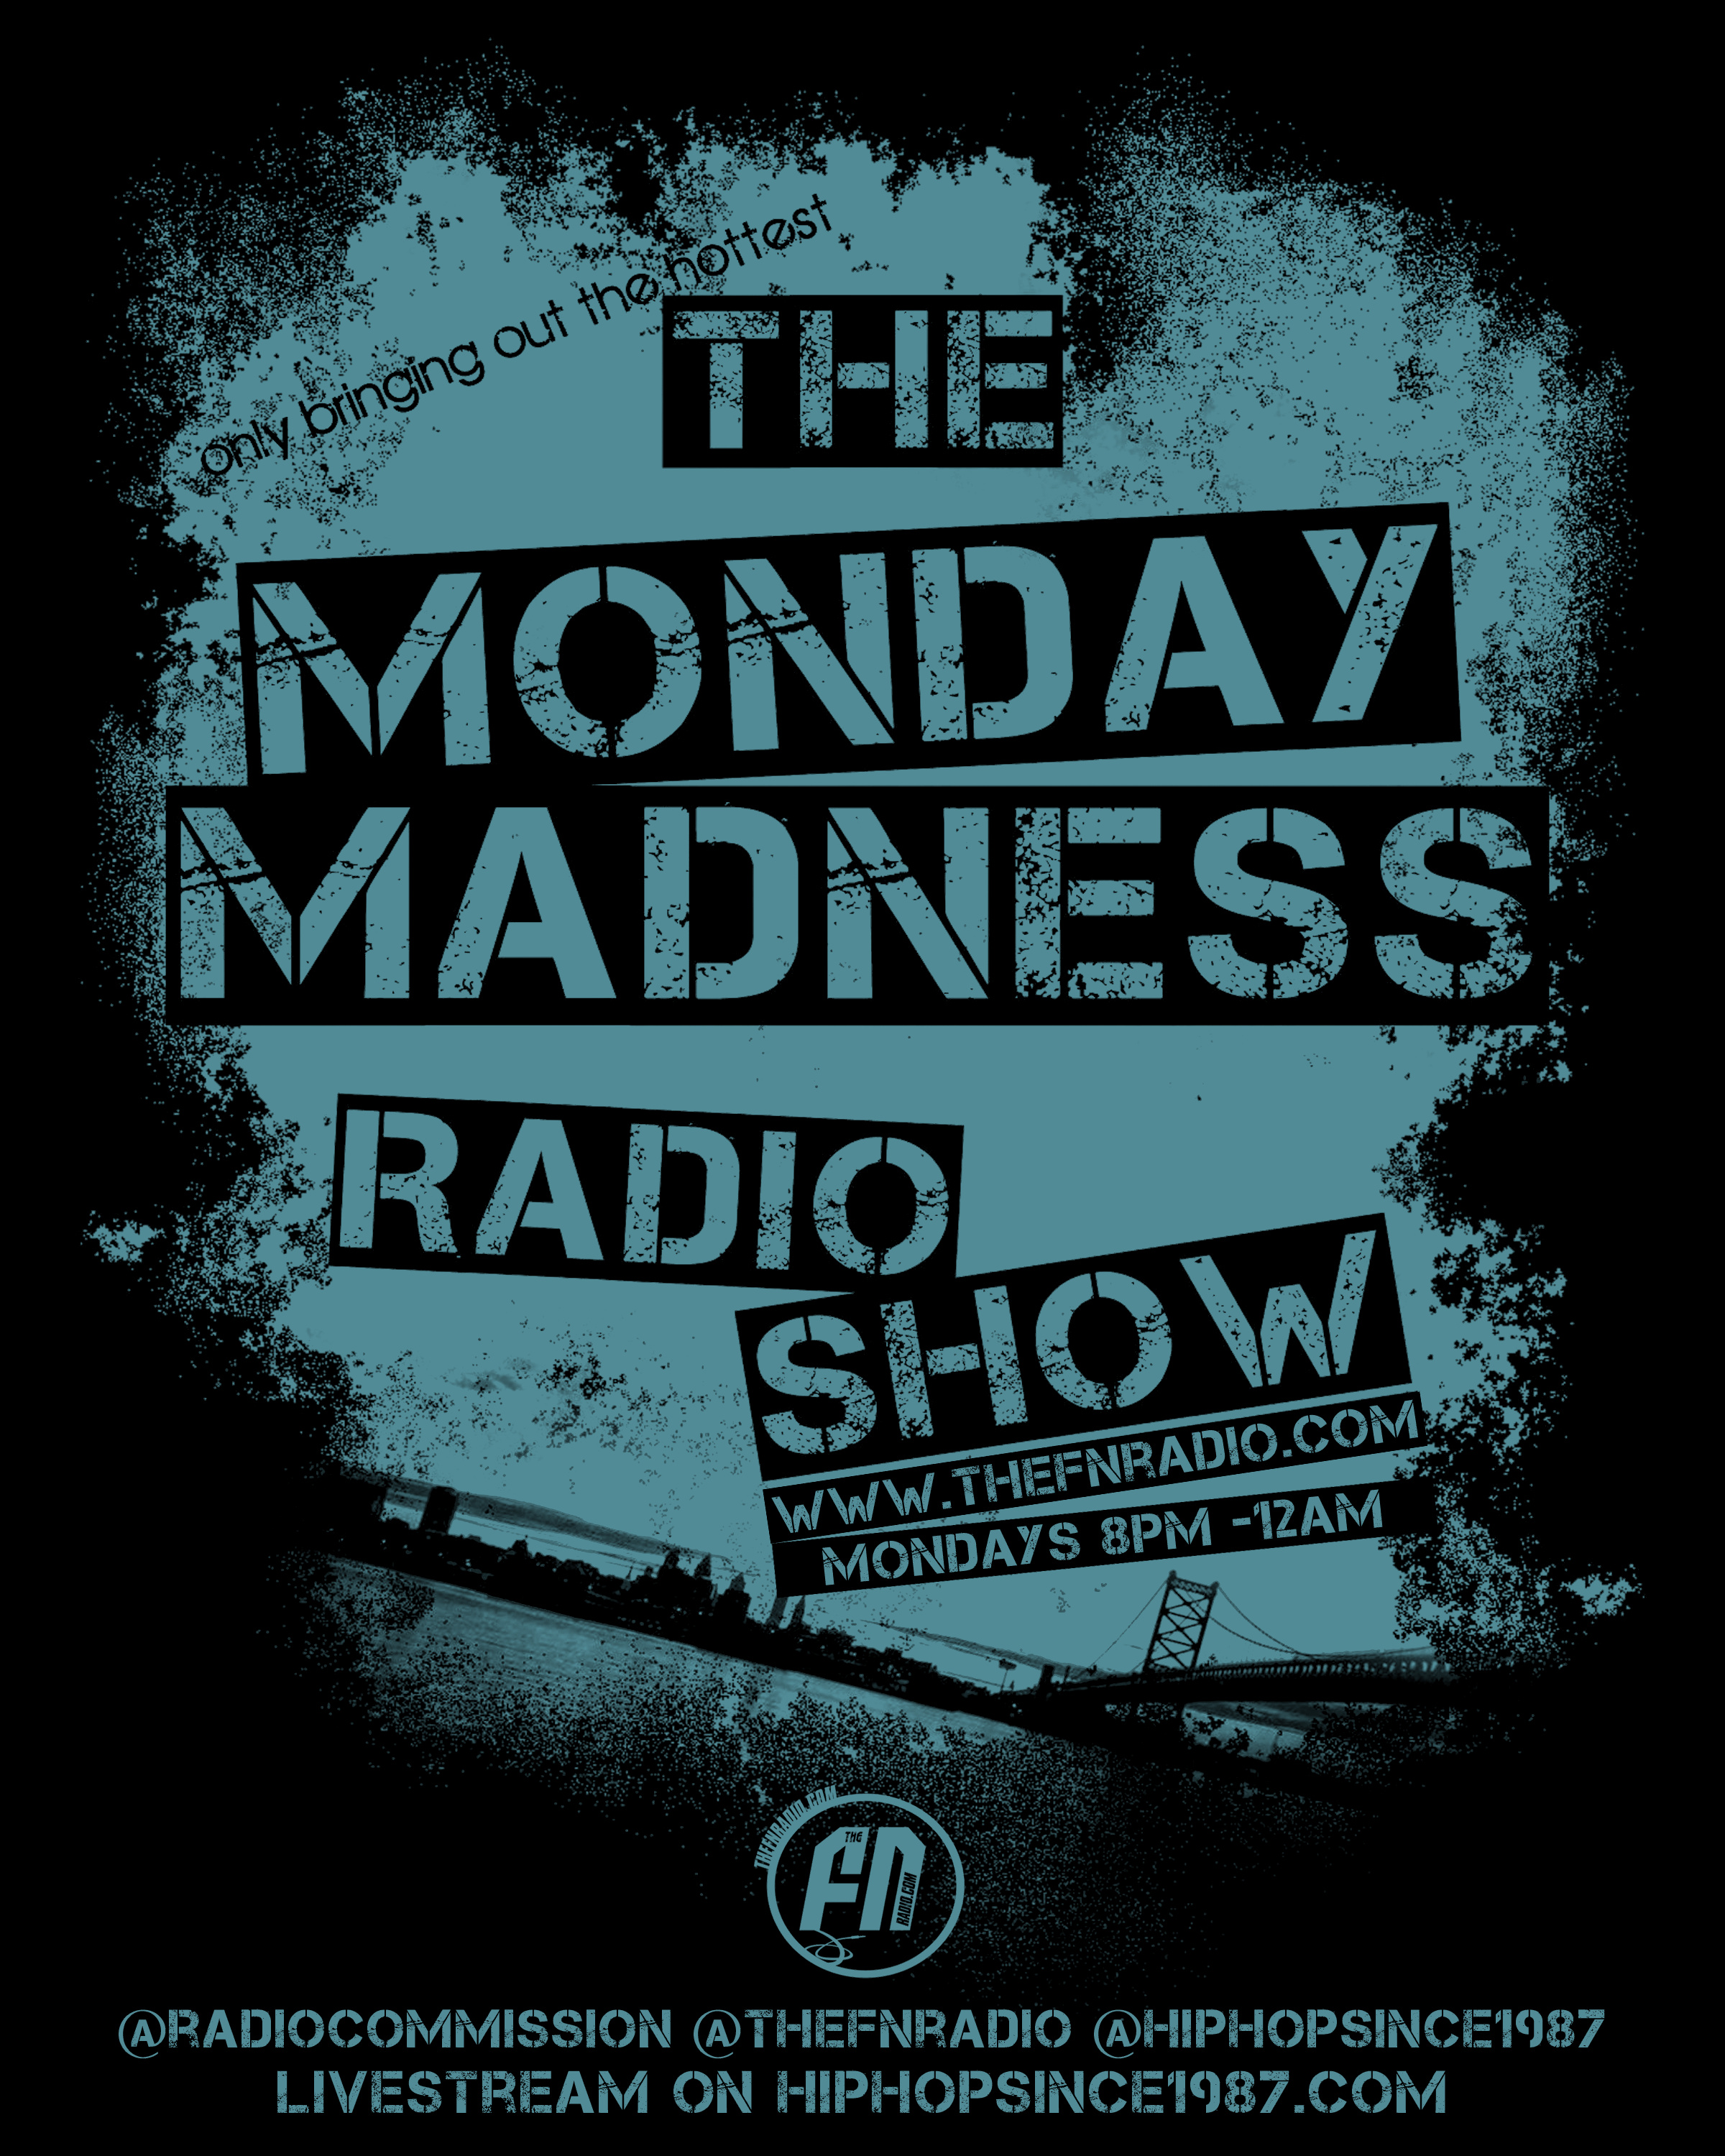 MondayMadnessk2 Tonight The Monday Madness Show (@Monmadnessradio) Ft @Imjuskp & @Ryanstar #PERSONALS 8pm Livestream on Hiphopsince1987.Com  